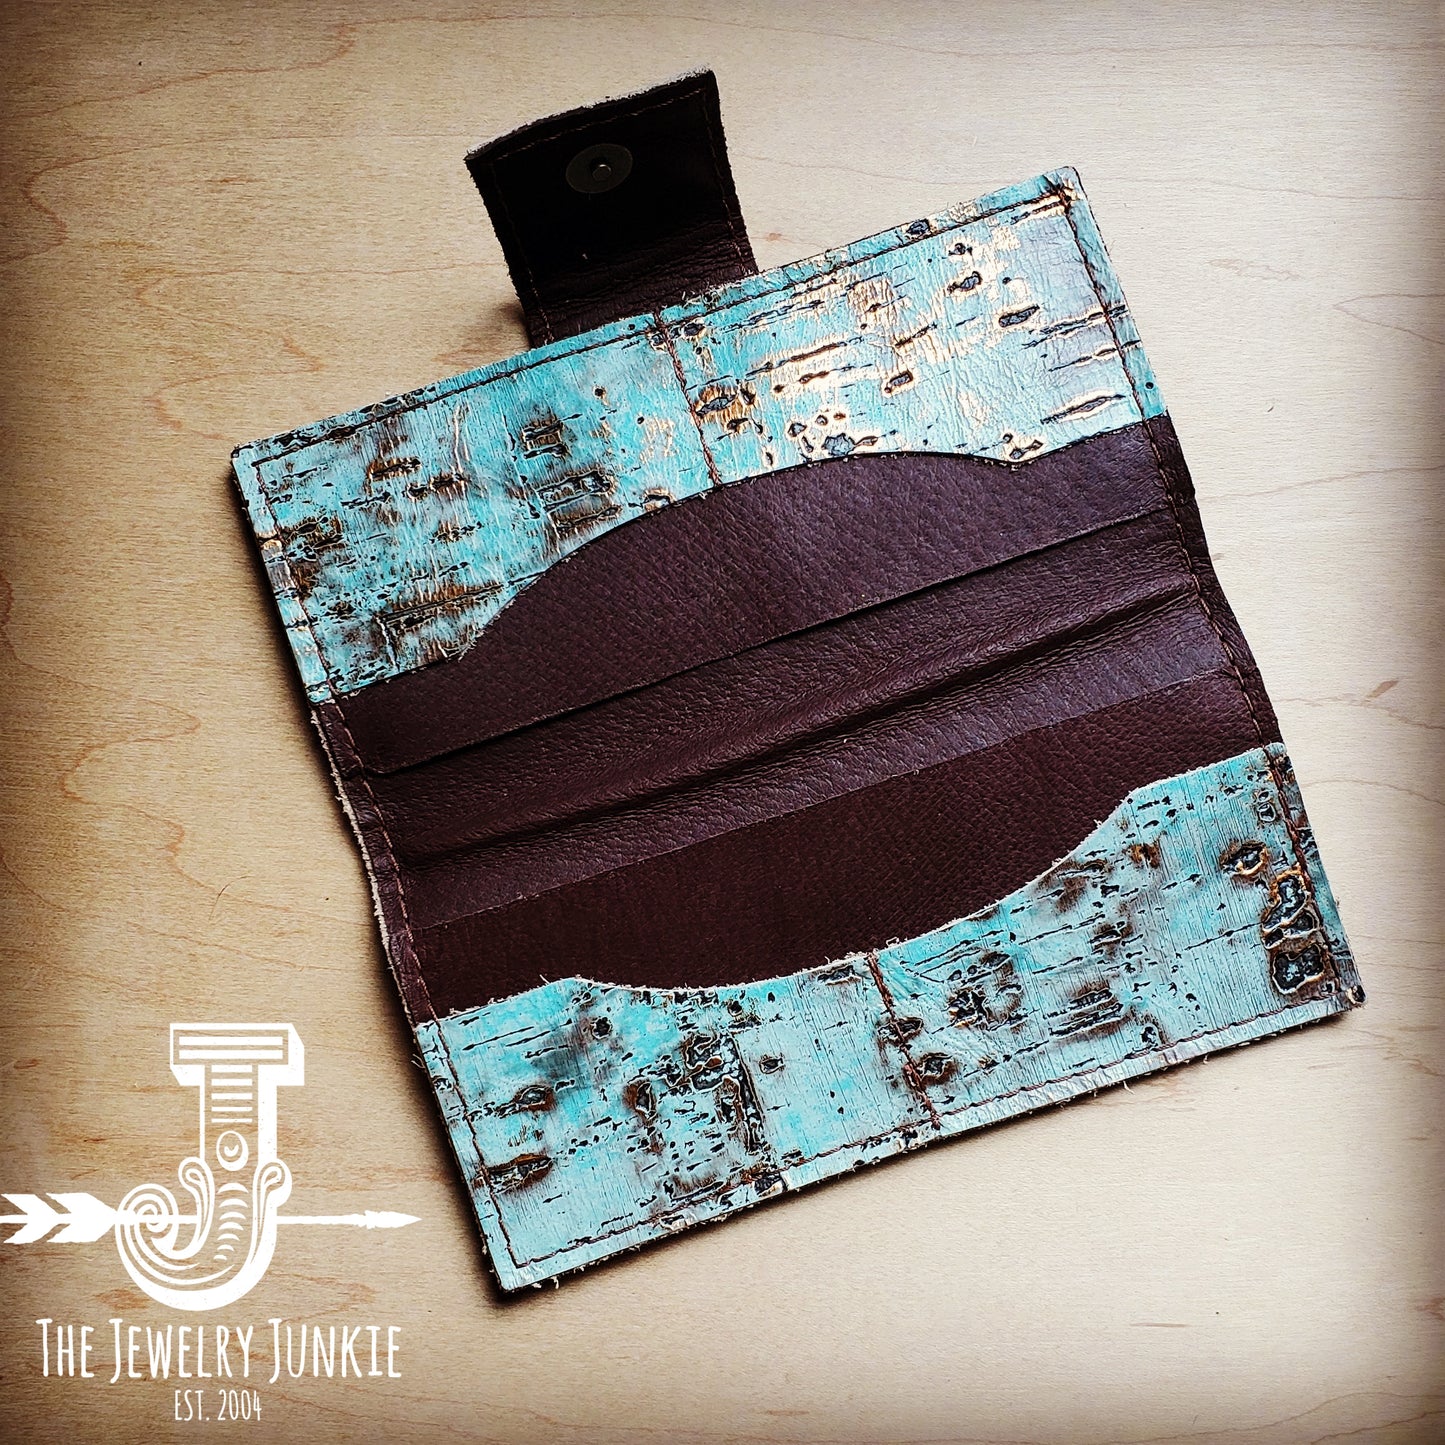 Embossed Leather Wallet in Turquoise Metallic w/ Snap 302e